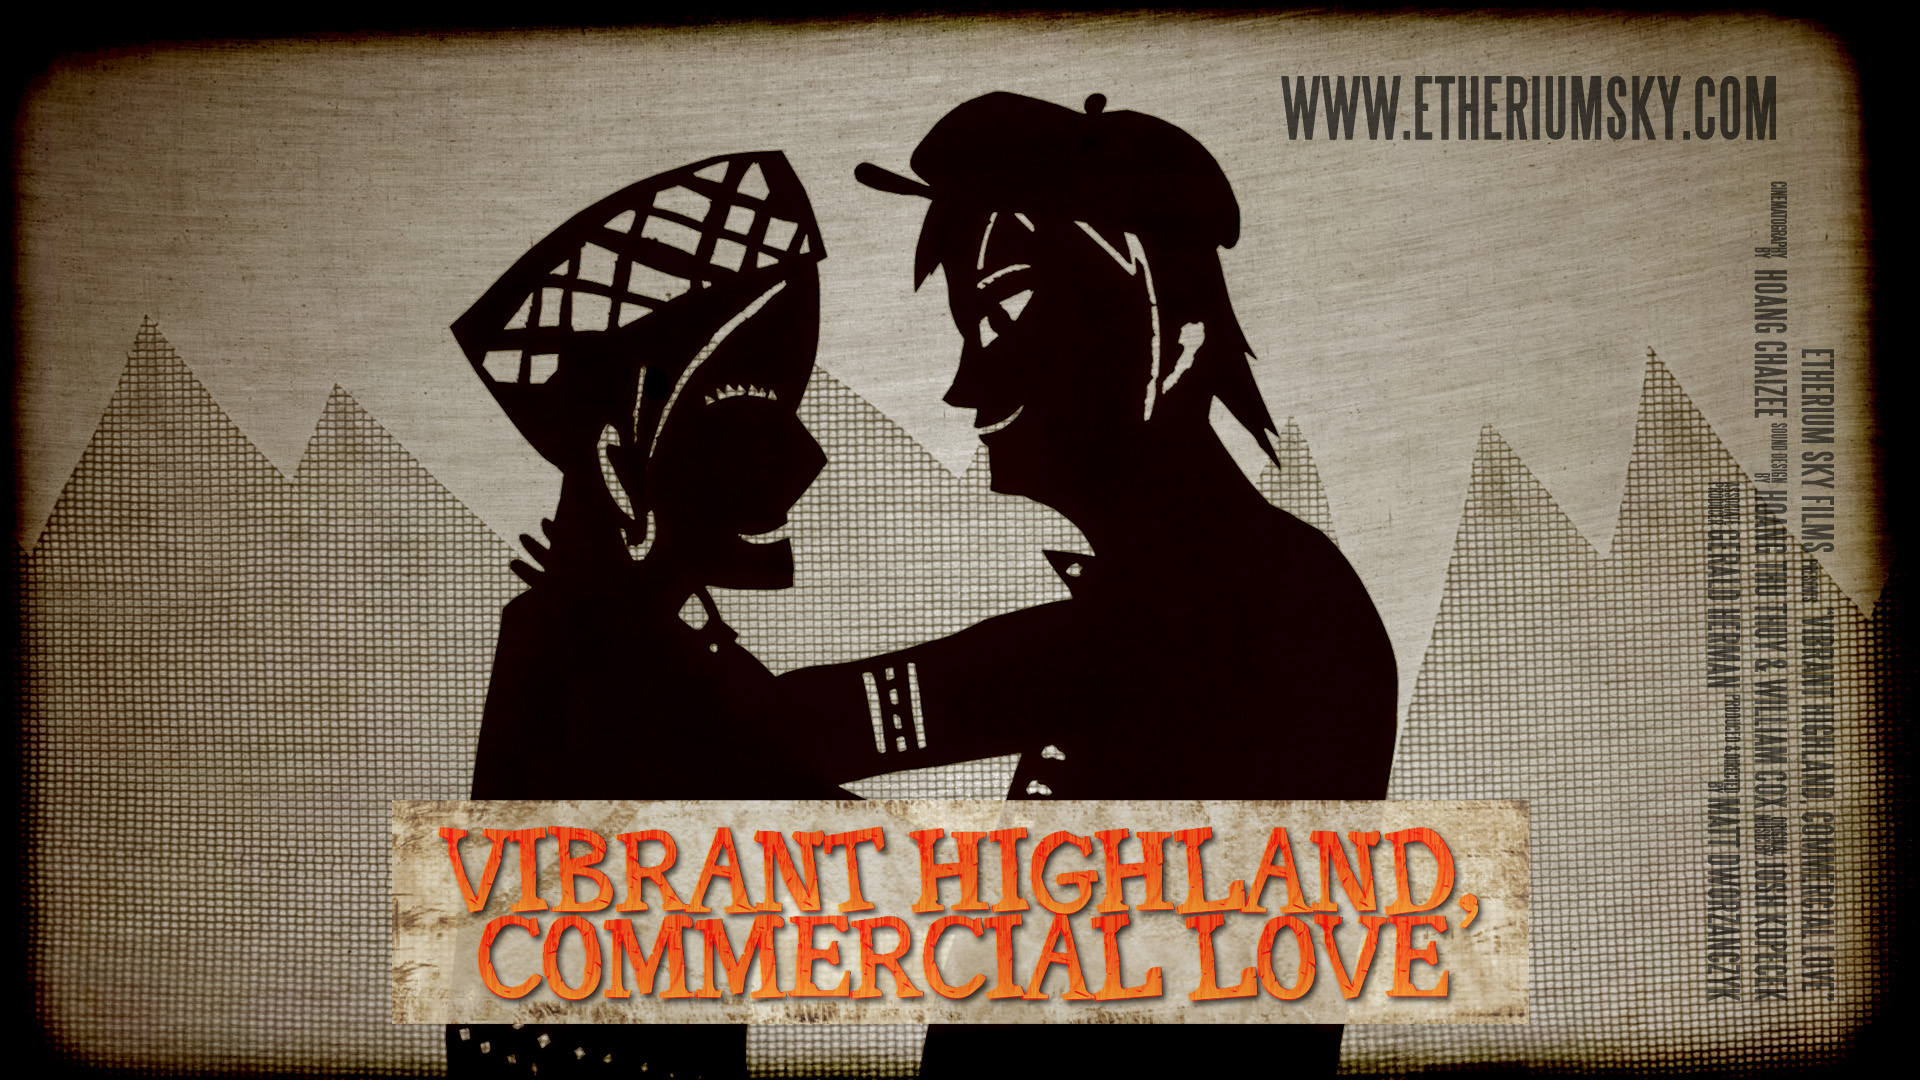 Vibrant Highland, Commercial Love – An Adventure Documentary from Vietnam